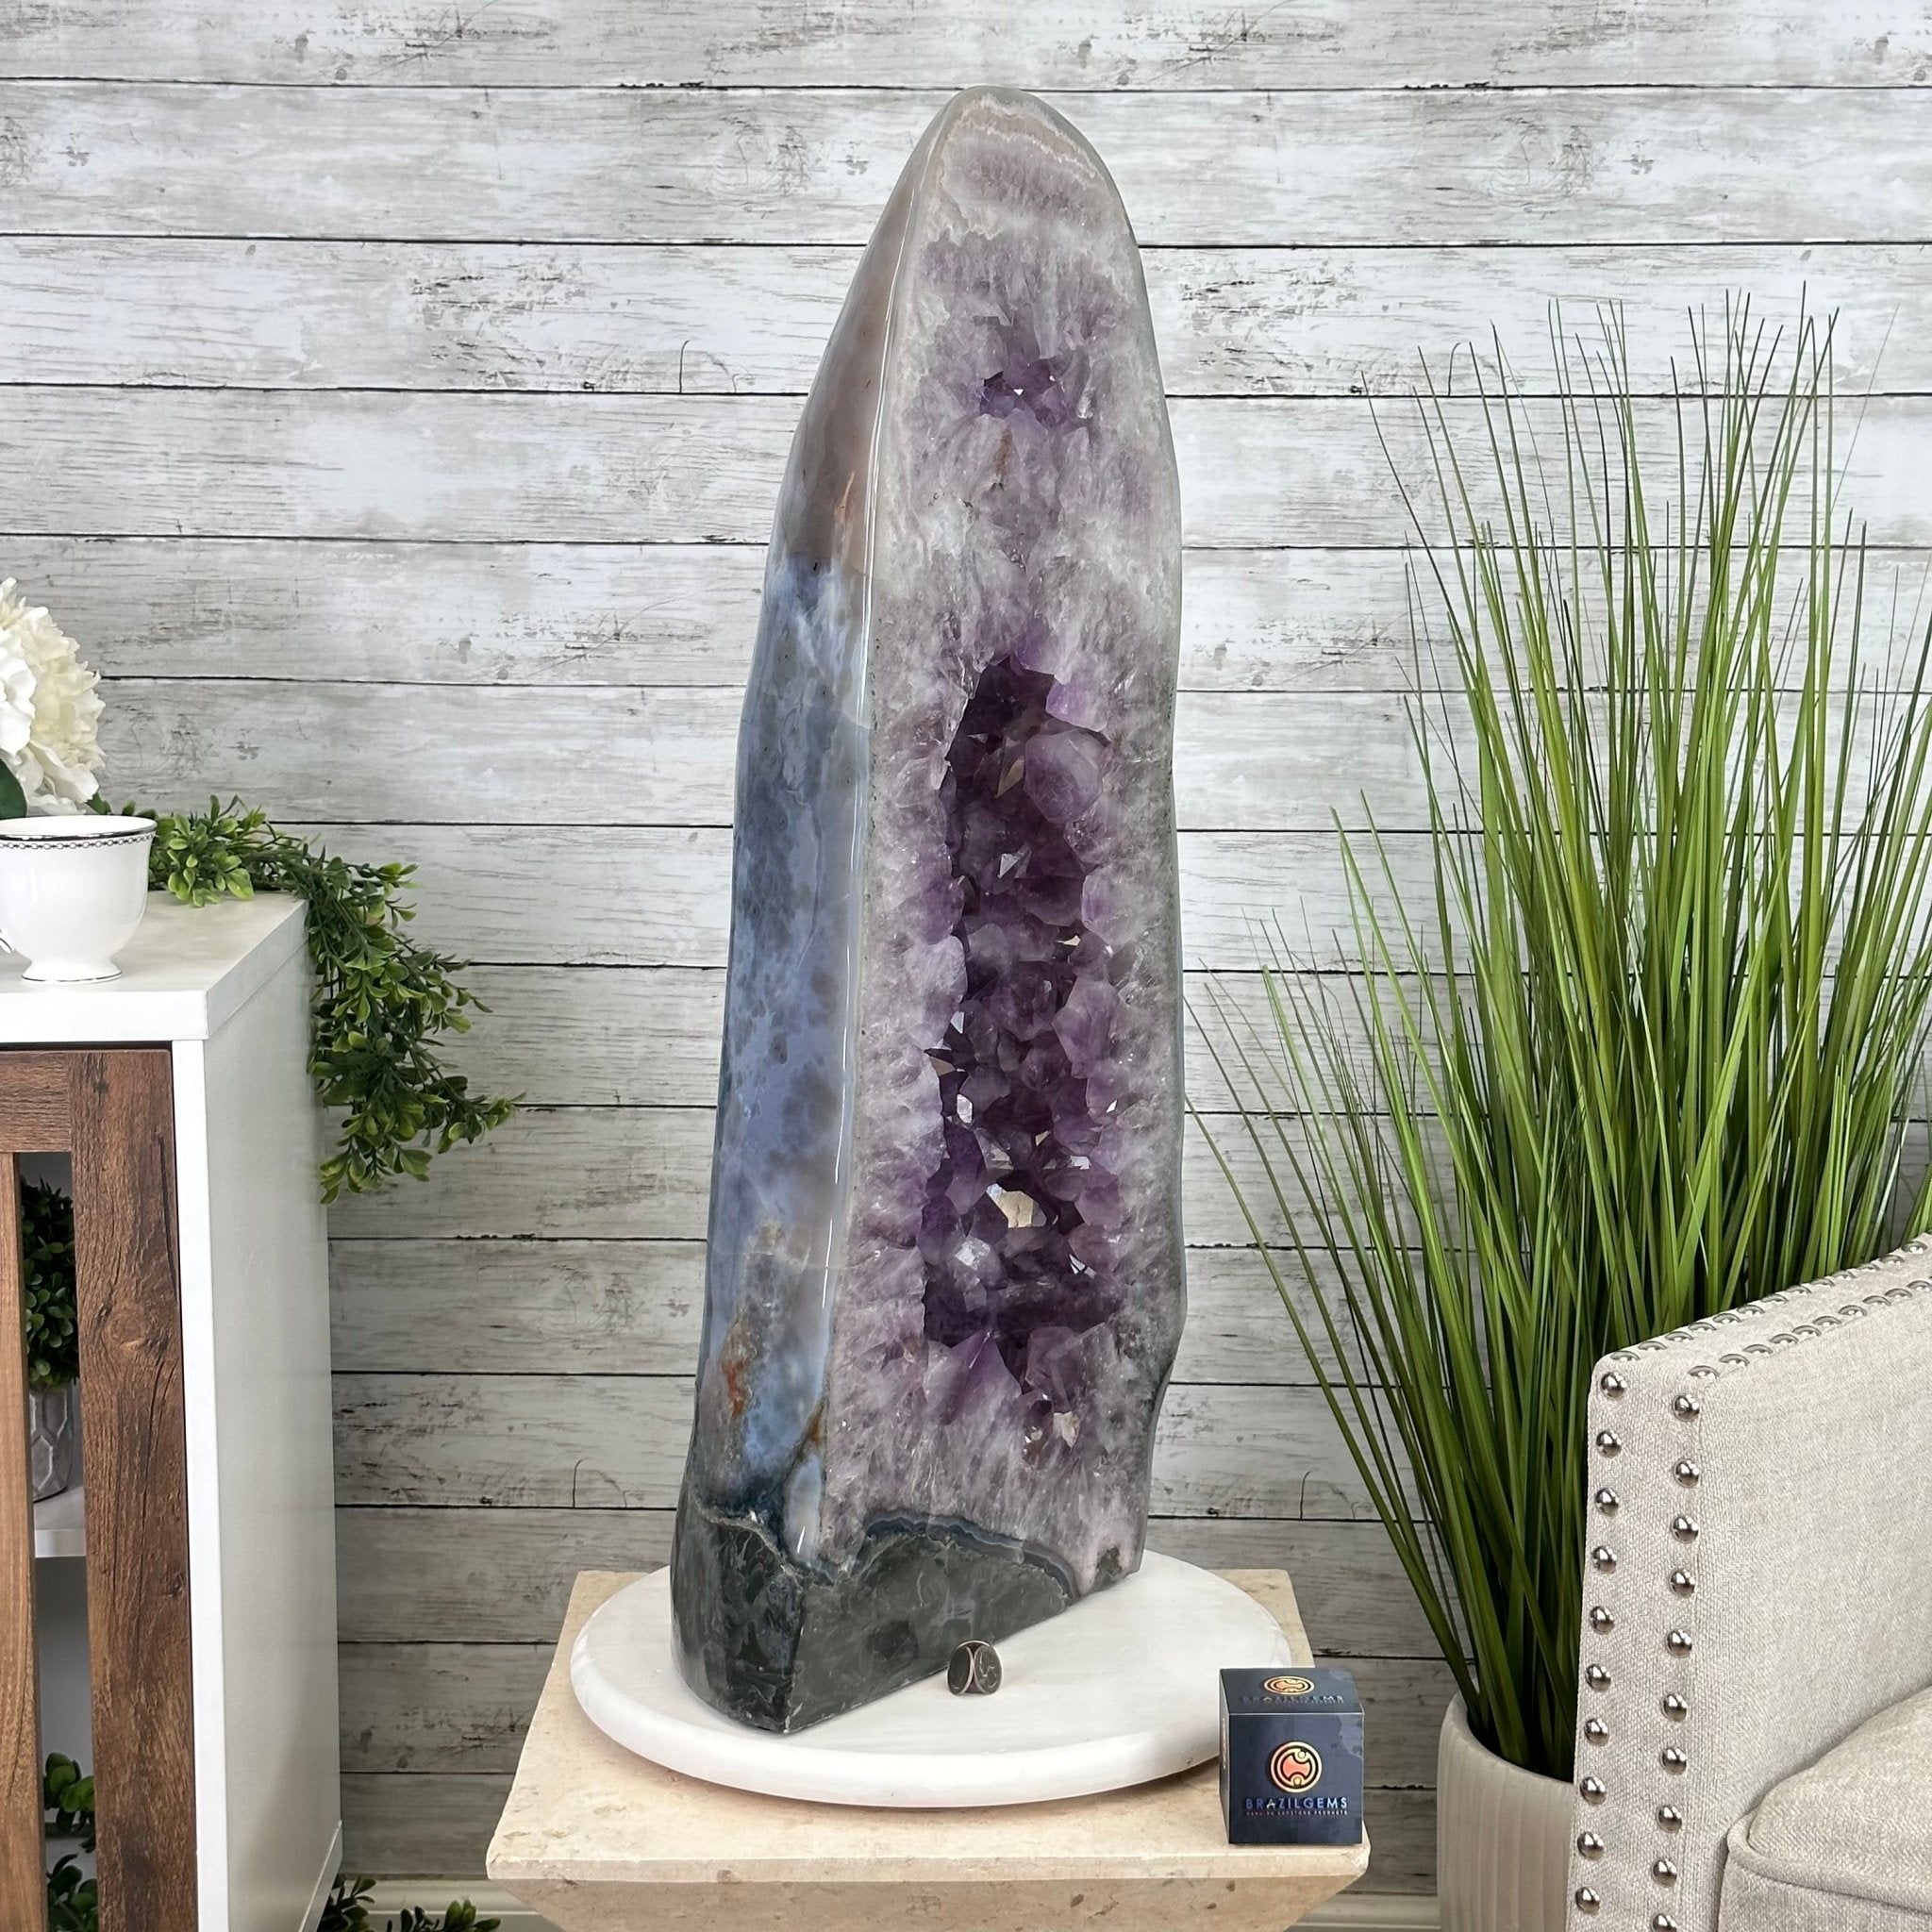 Standard Plus Quality Polished Brazilian Amethyst Cathedral, 112.2 lbs & 31" tall Model #5602-0064 by Brazil Gems - Brazil GemsBrazil GemsStandard Plus Quality Polished Brazilian Amethyst Cathedral, 112.2 lbs & 31" tall Model #5602-0064 by Brazil GemsPolished Cathedrals5602-0064